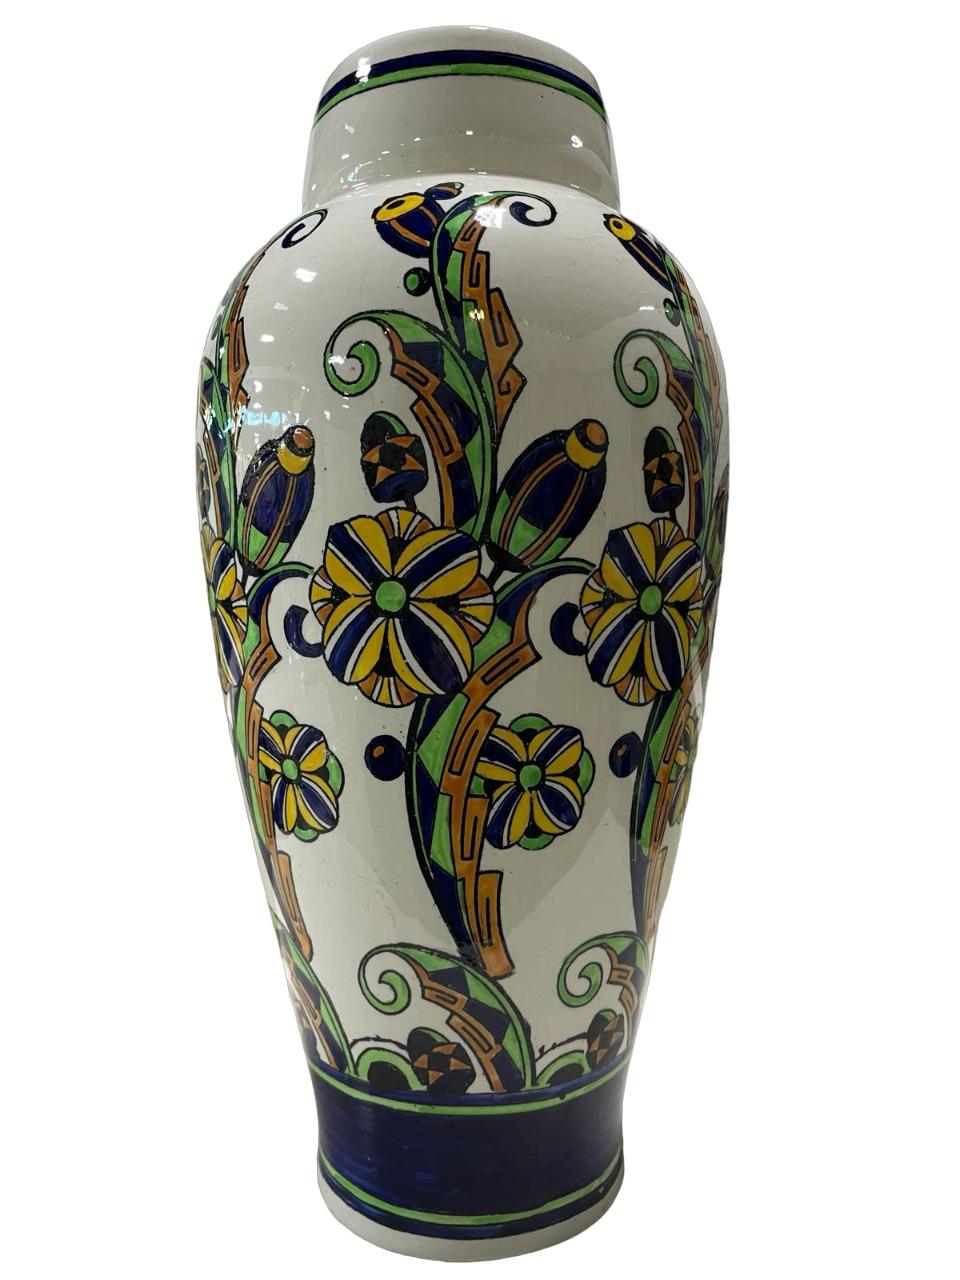 ART DECO LARGE Charles Catteau for Boch Keramis Vase circa 1927 For Sale 9